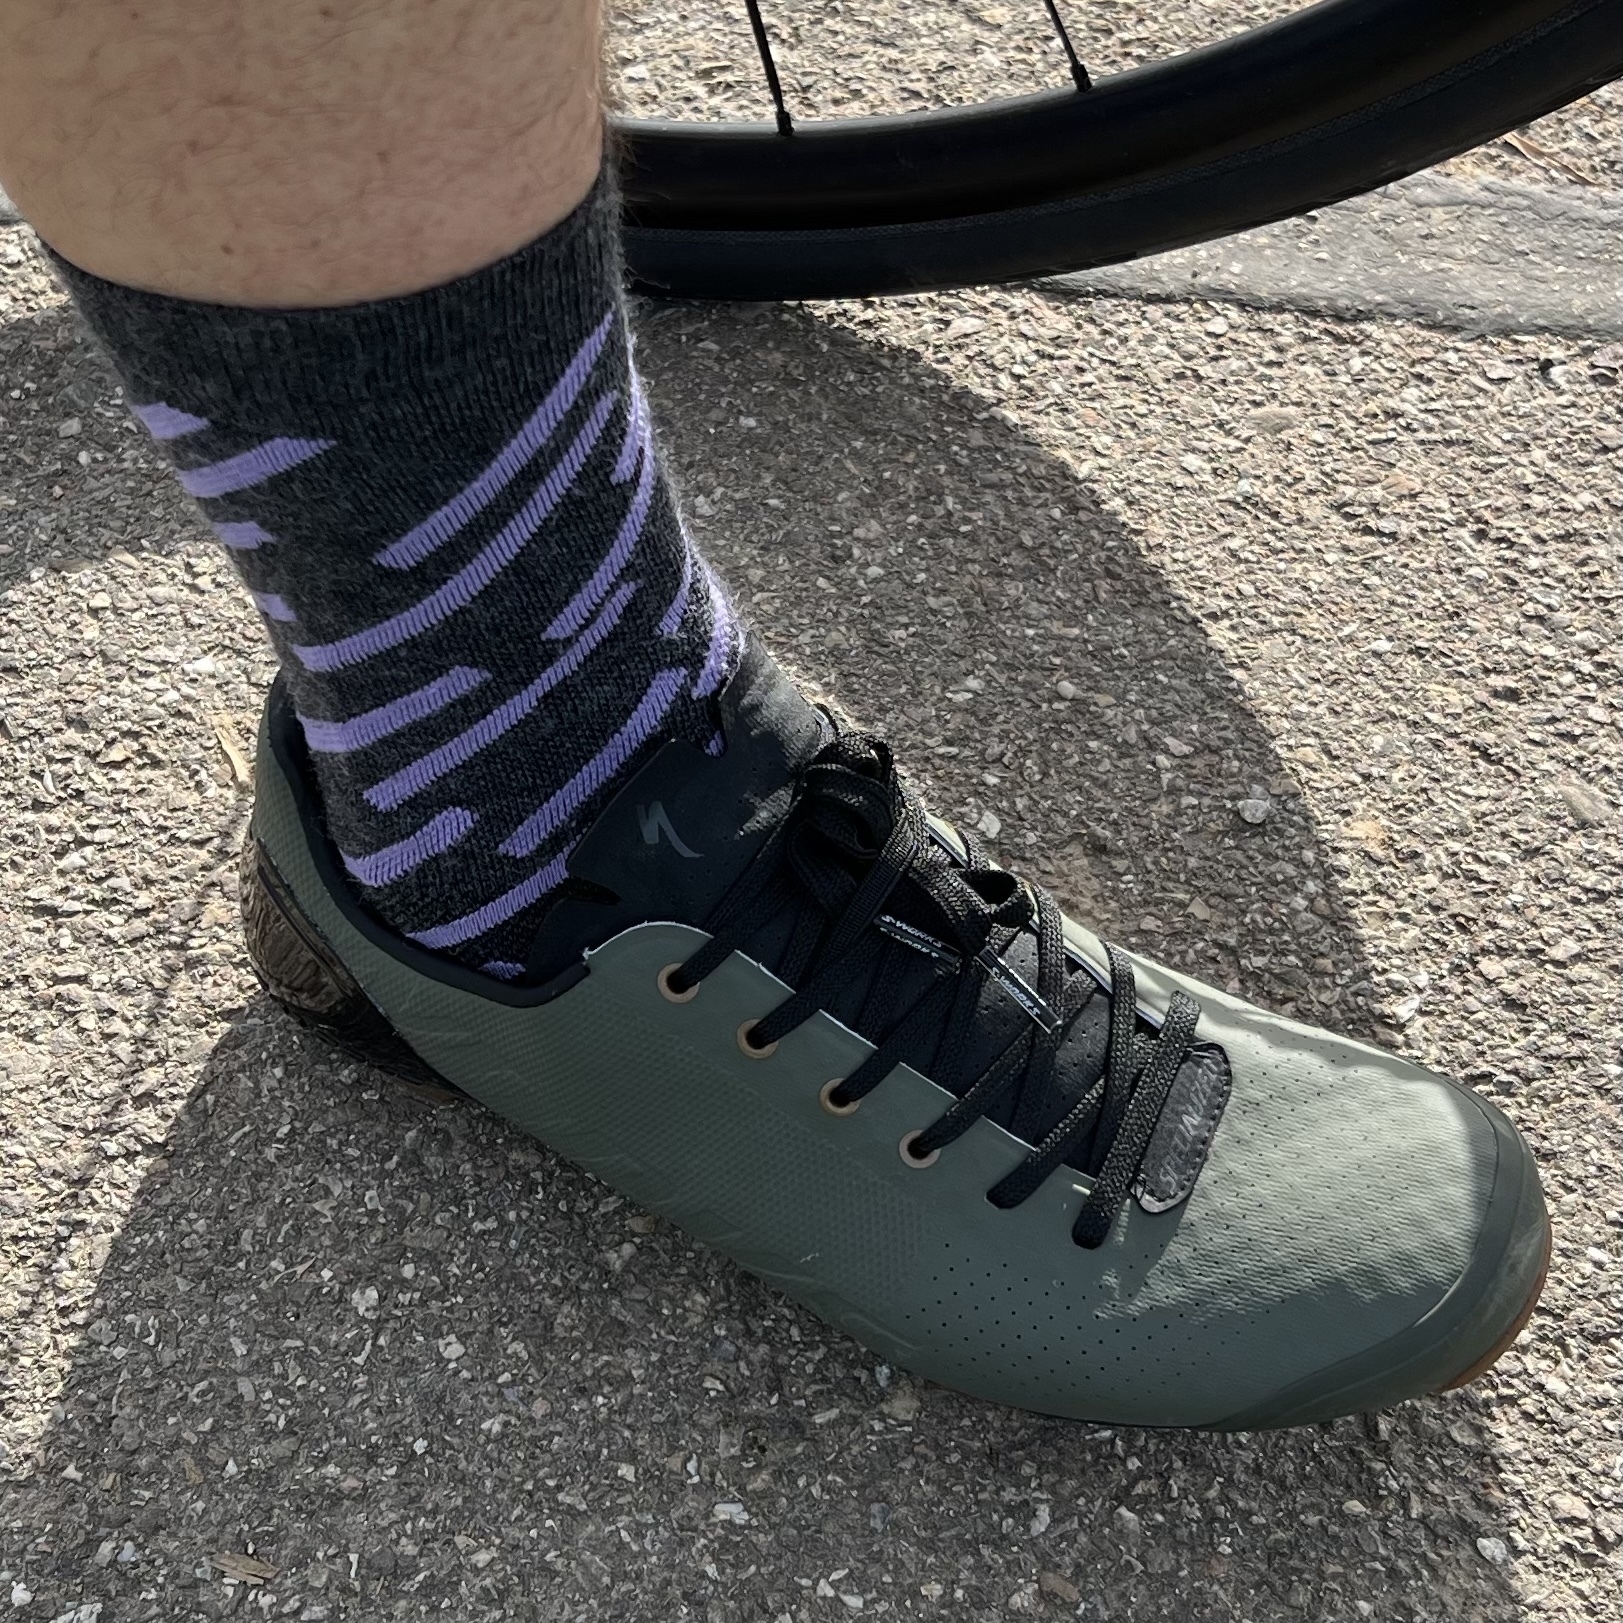 Right foot photographed from the front and left, in a matte teal clipless cycling shoe with black laces. Focus is on the dark grey socks with a pattern of diagonal lavender-coloured stripes.